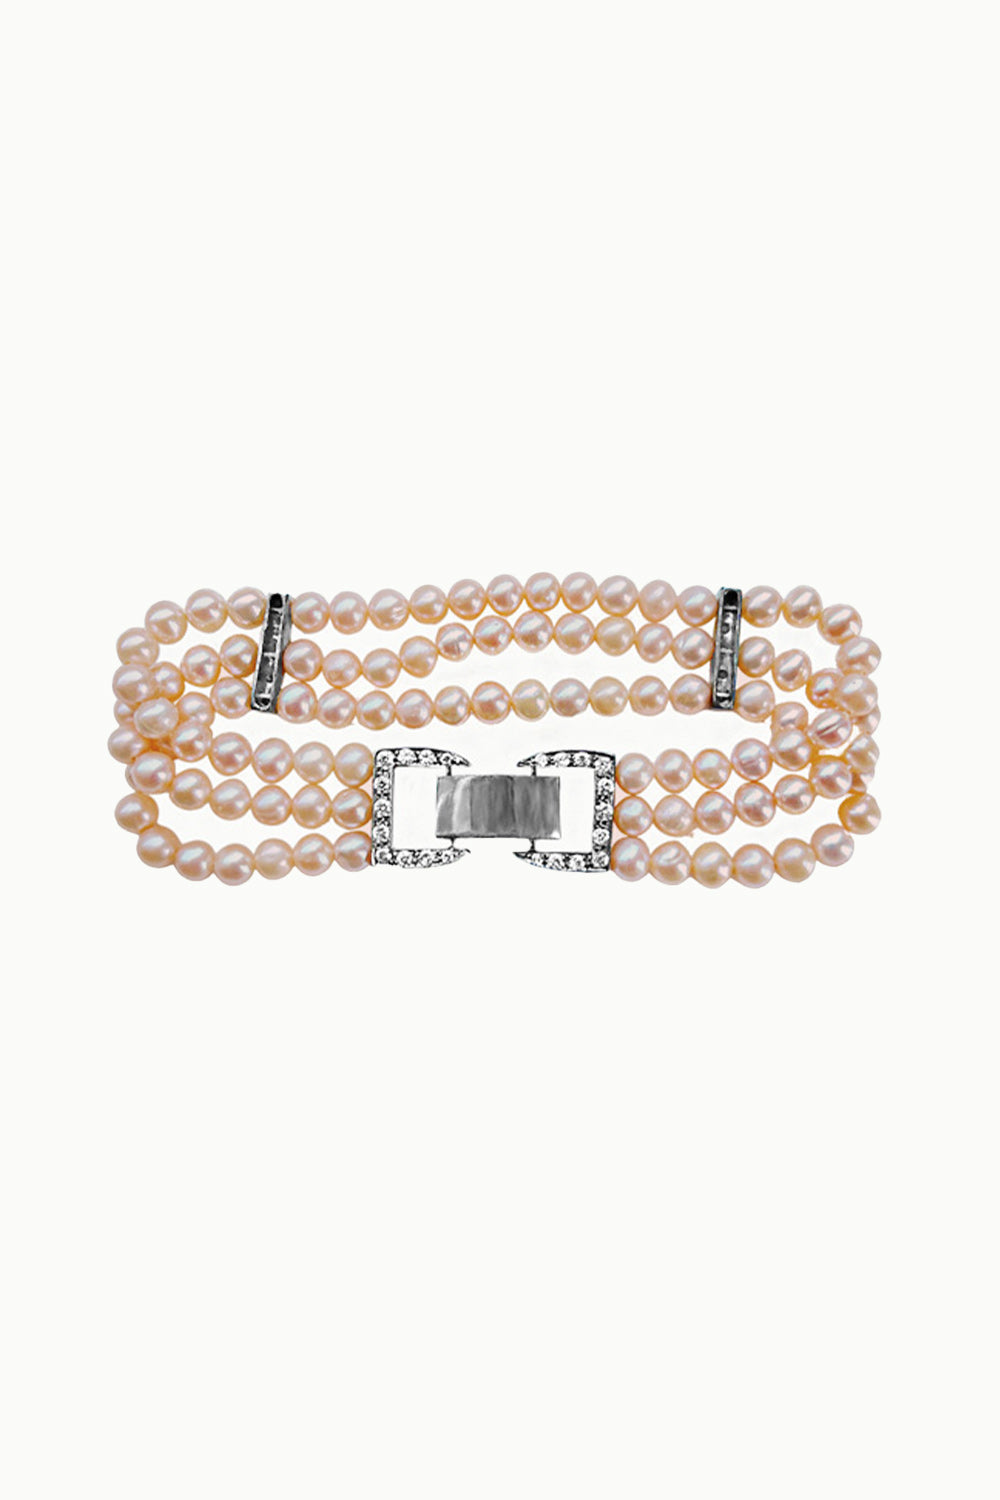 Sivalya Grace Layered Pearls Bracelet Sterling Silver - Peach